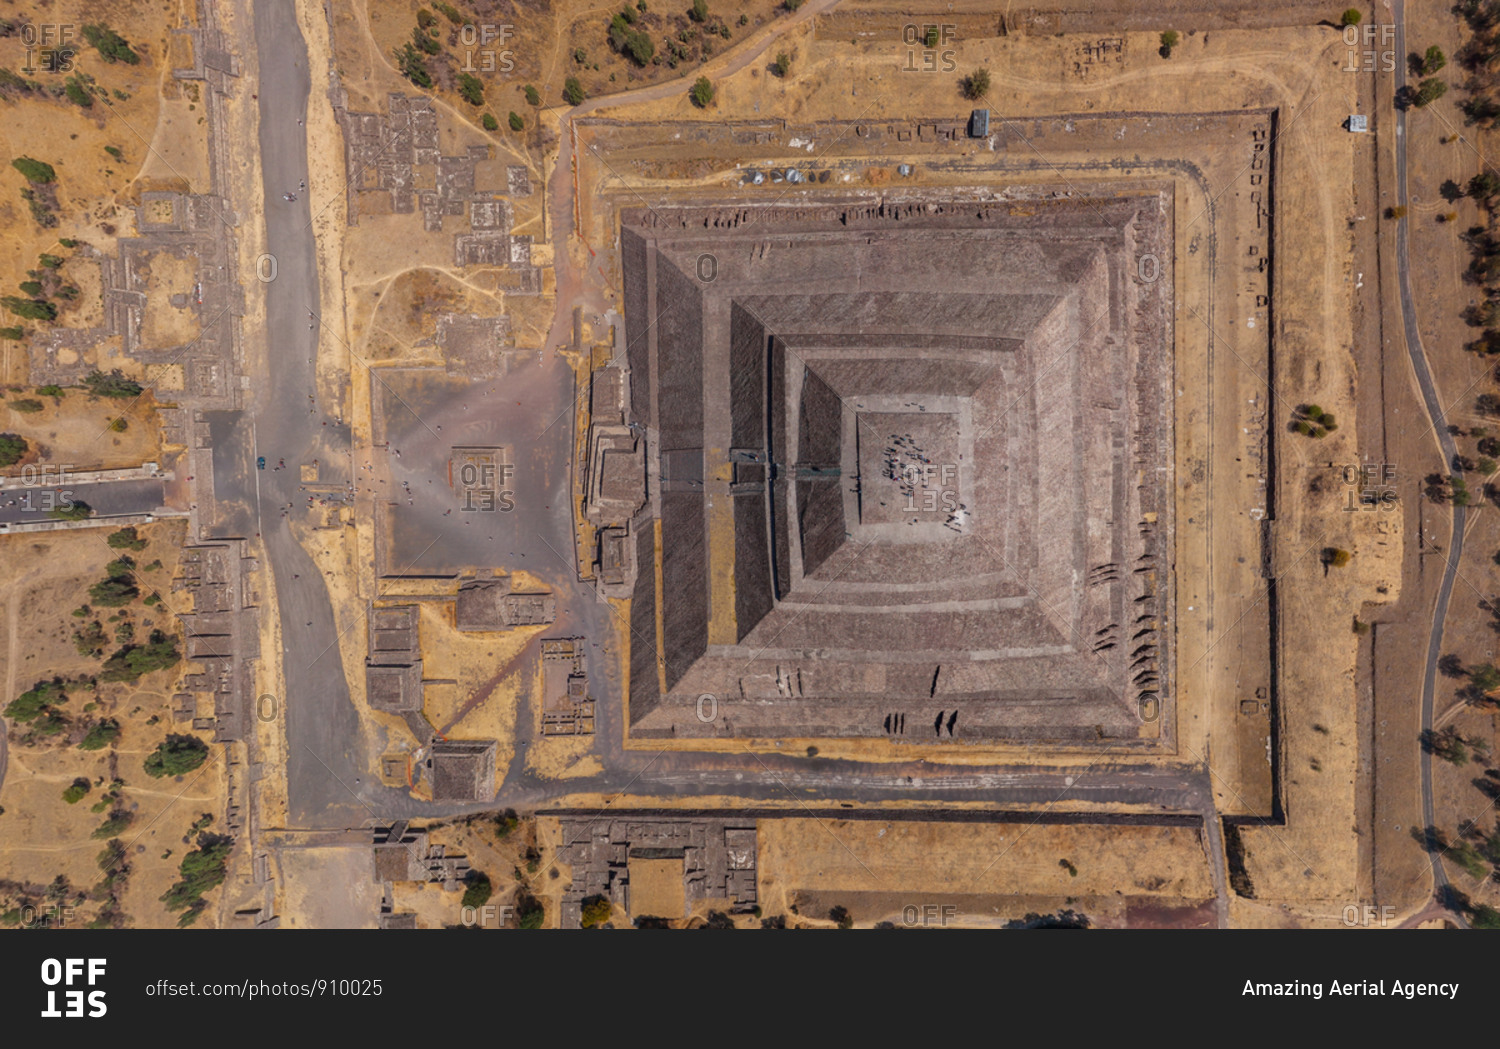 Aerial view of the Pyramid of the Sun, Teotihuacan, Mexico